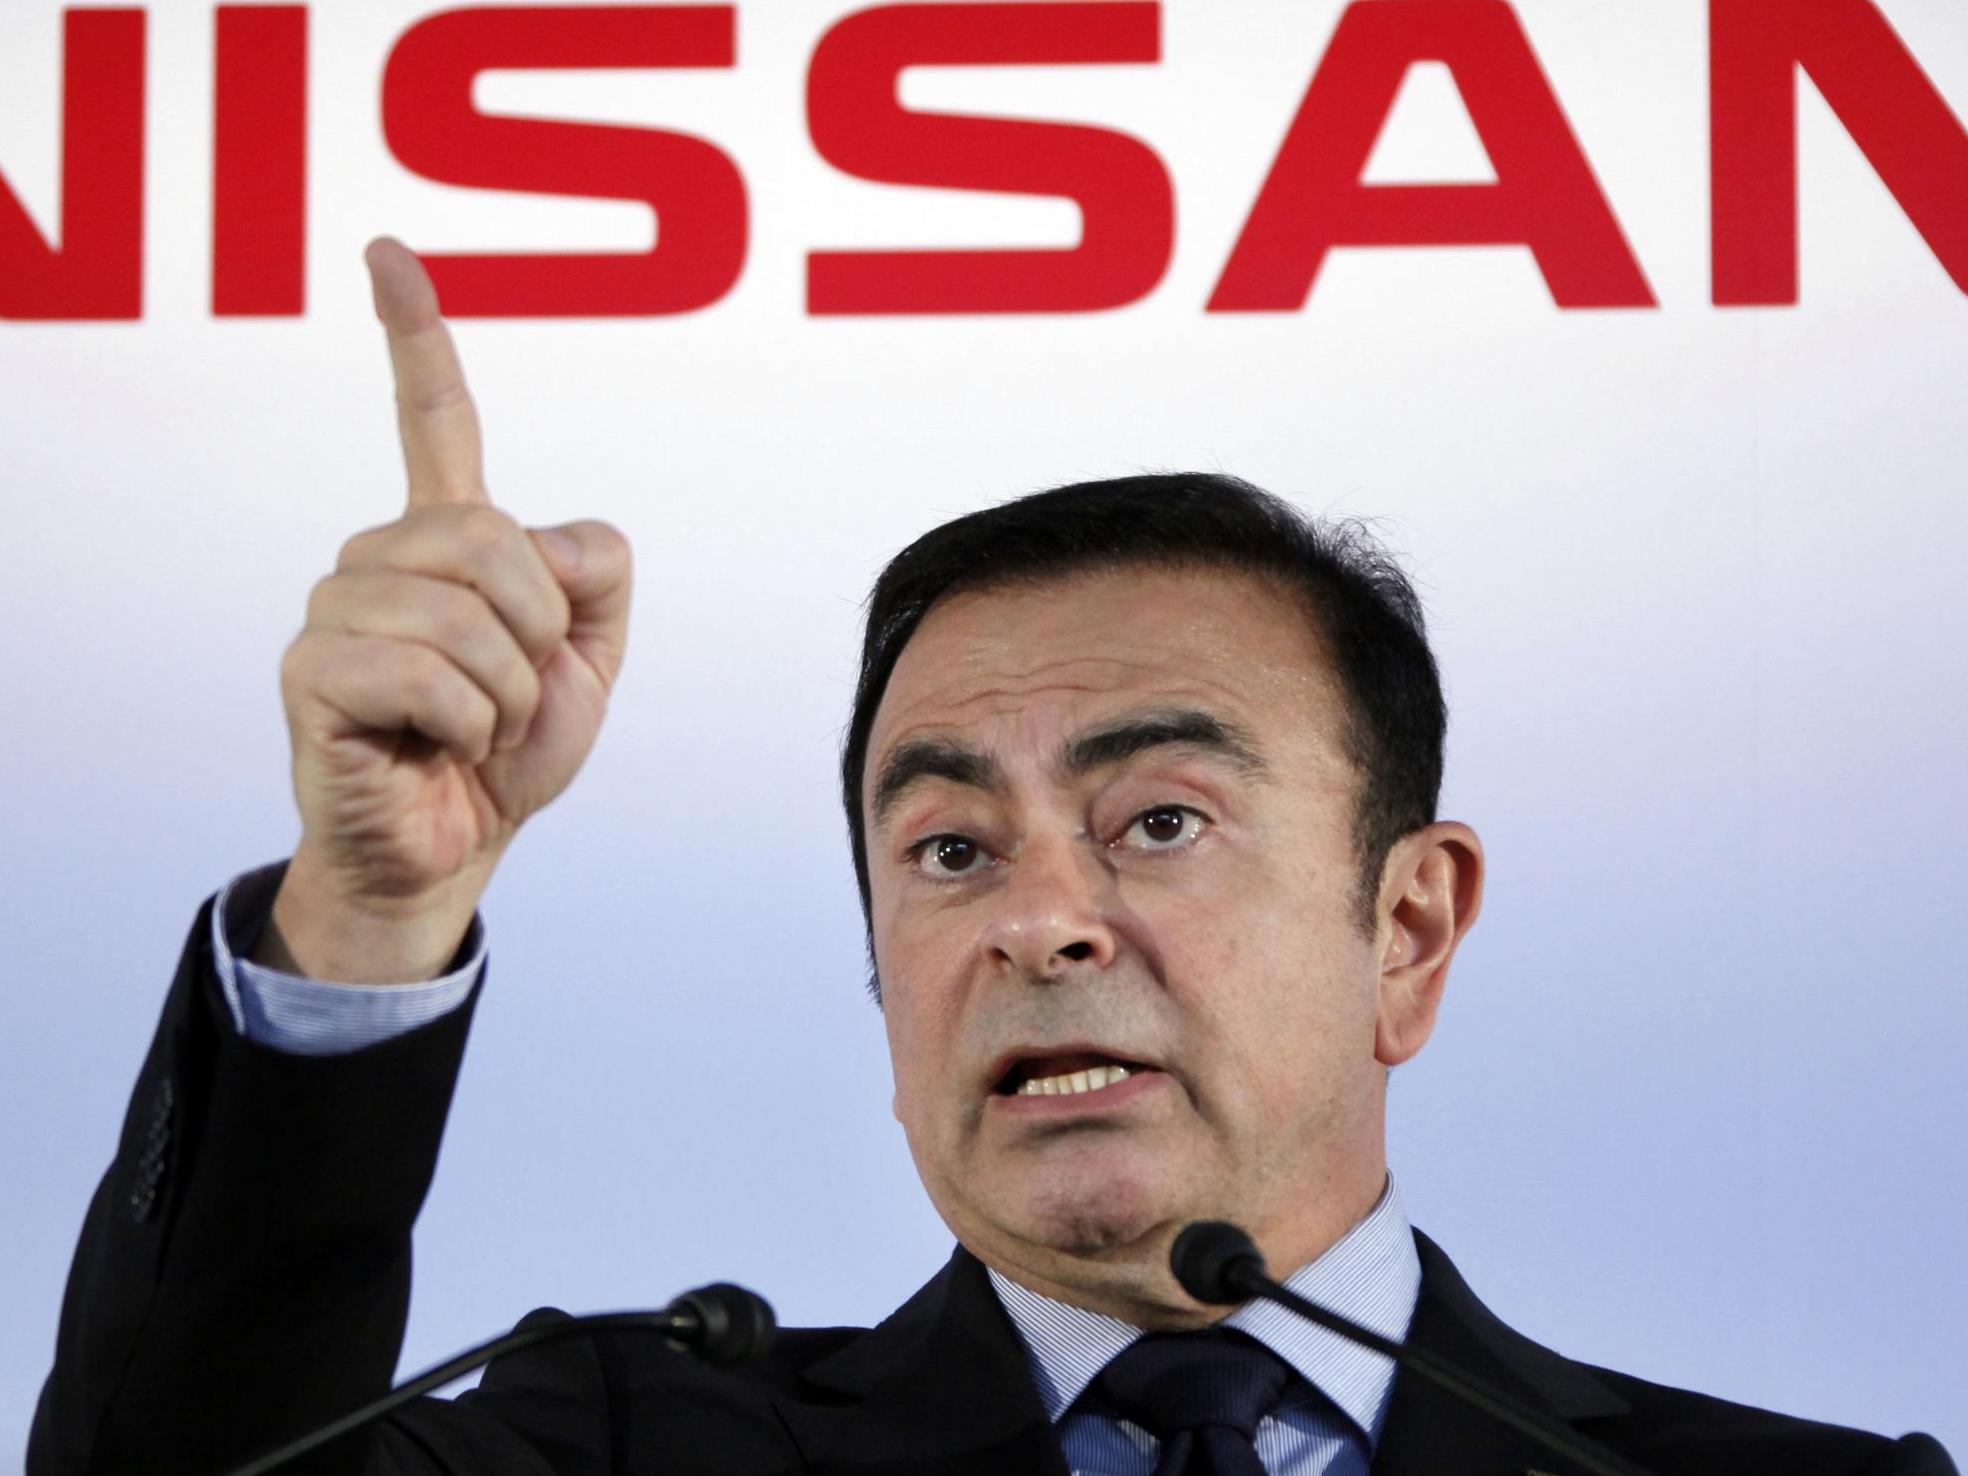 Carlos Ghosn was arrested on 19 November